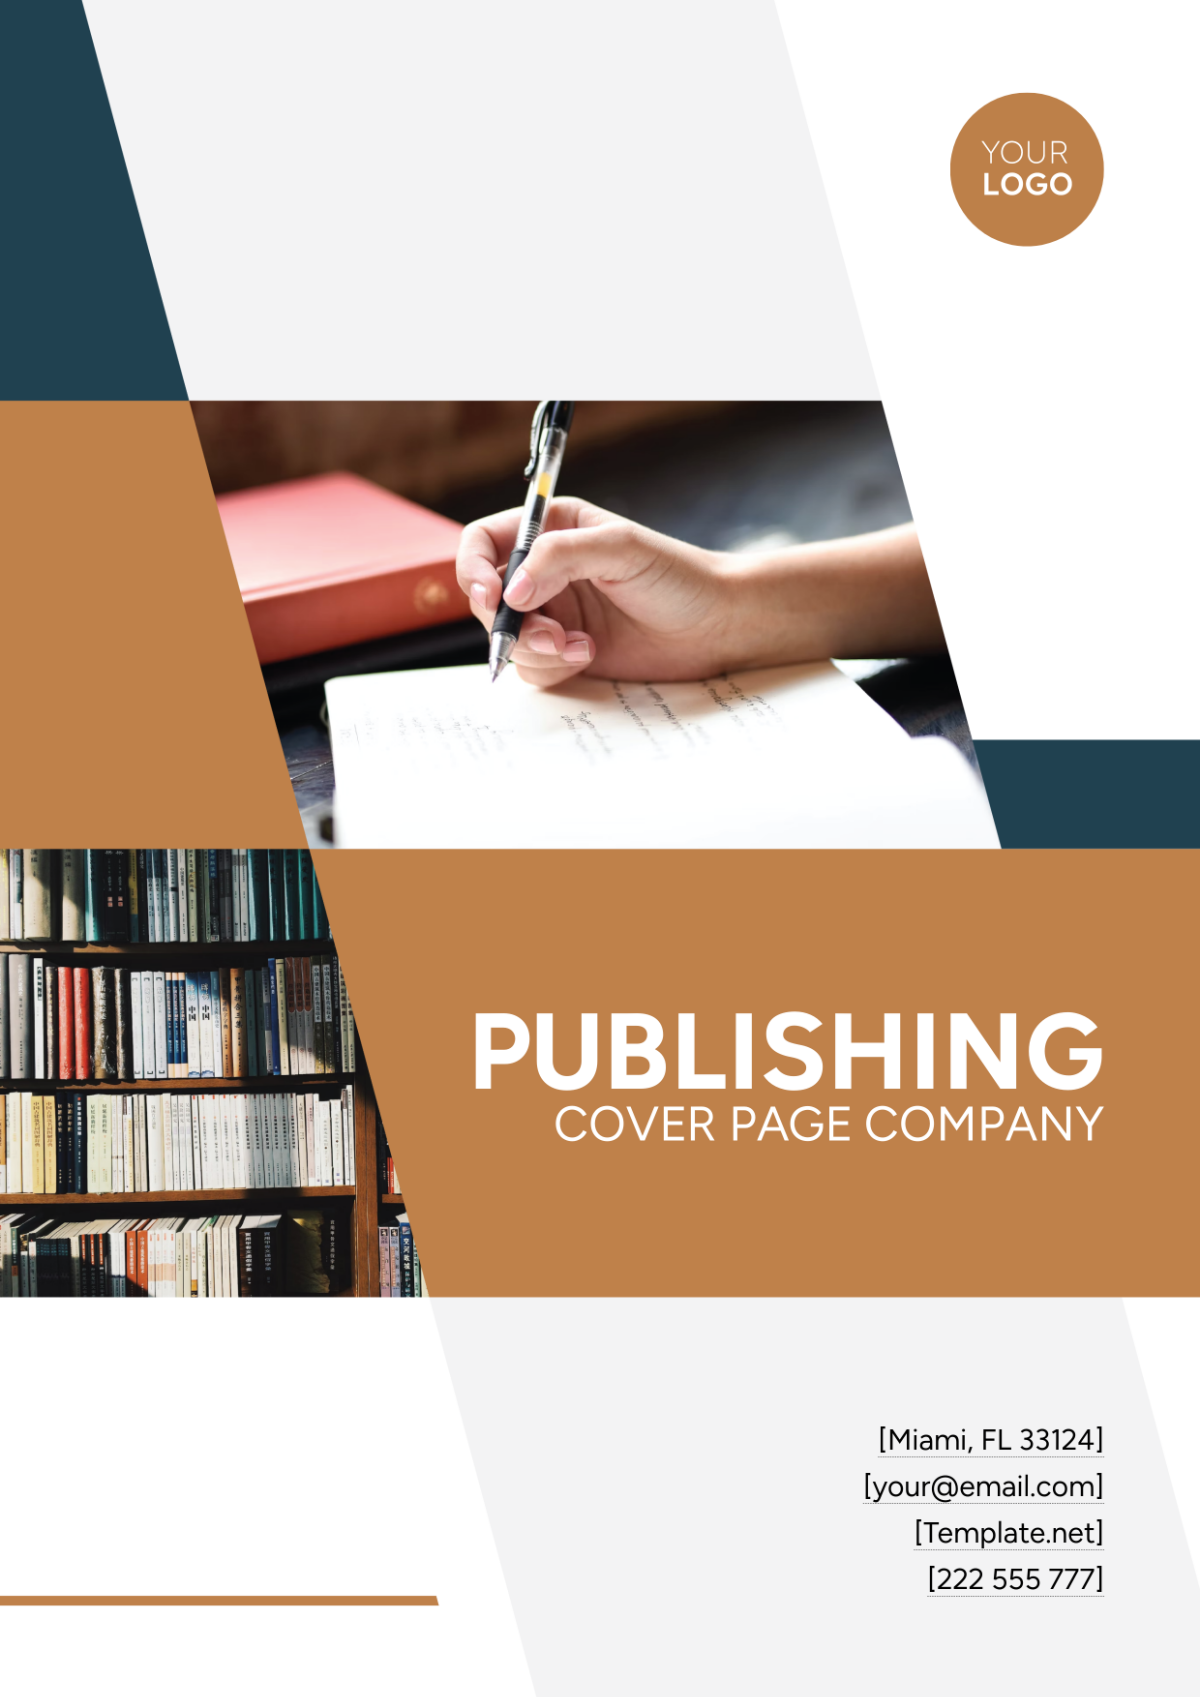 Publishing Cover Page Company